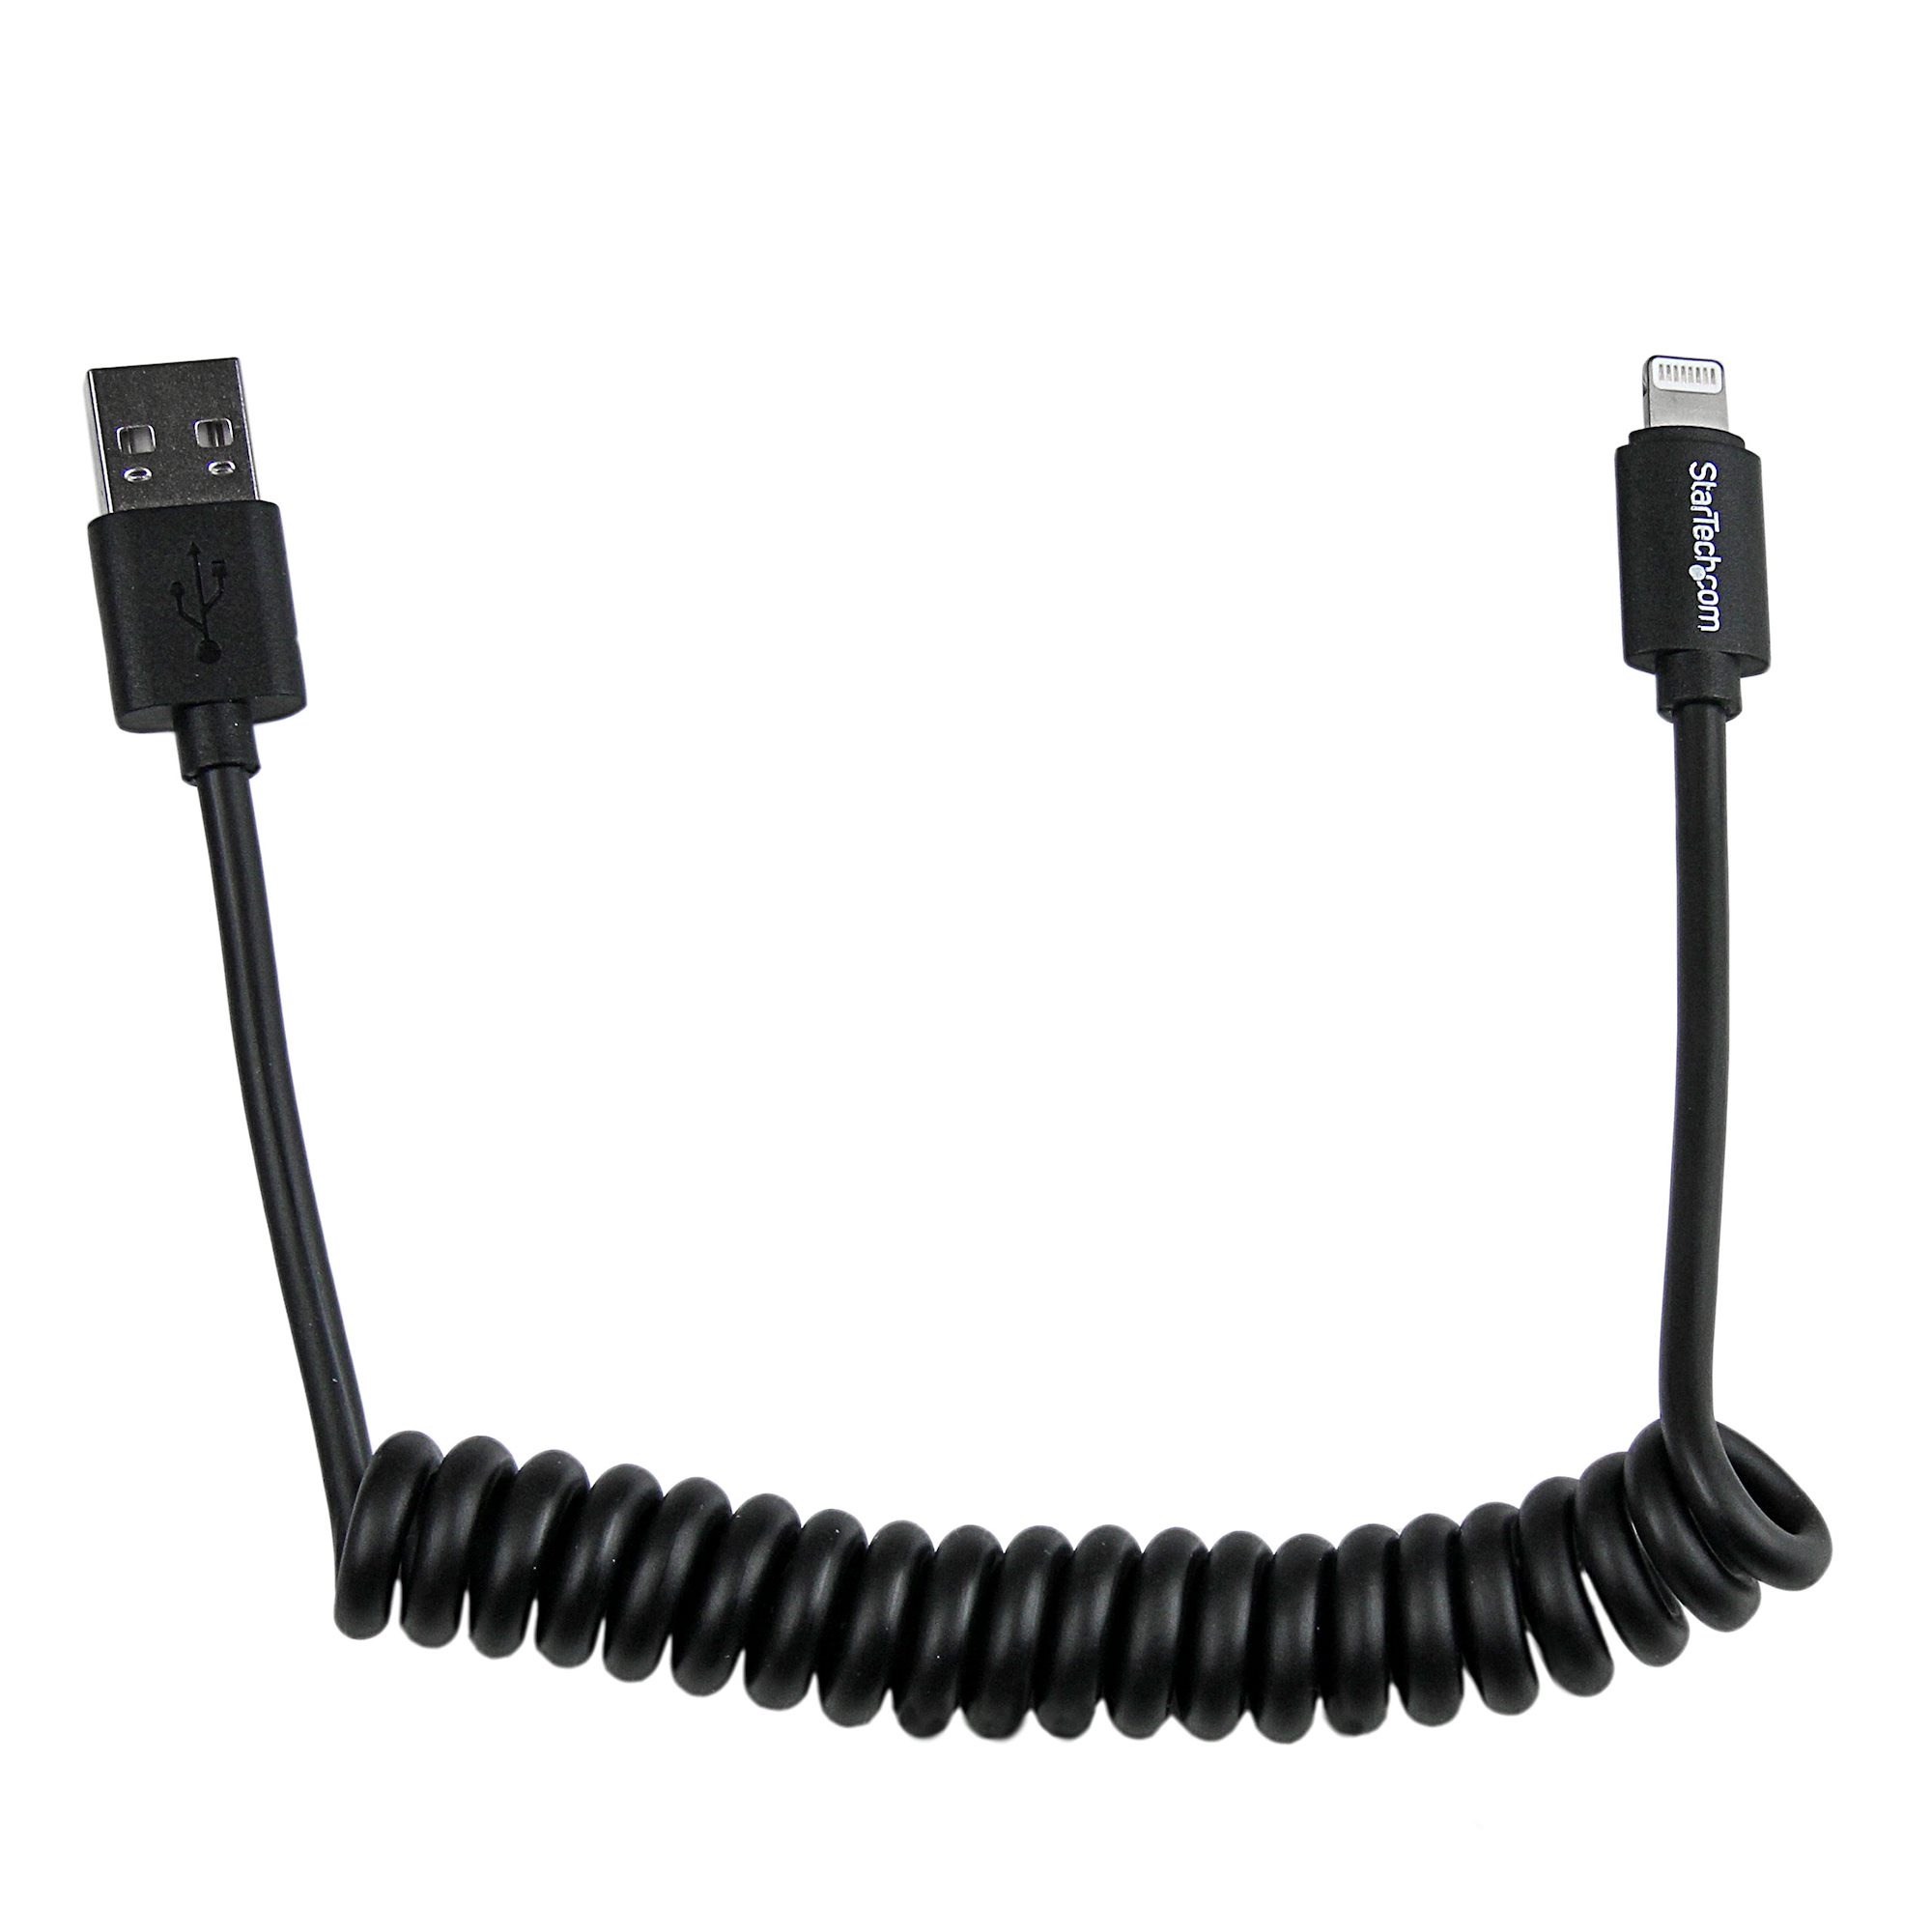 0.6m 2ft Coiled Lightning to USB Cable - Lightning Cables